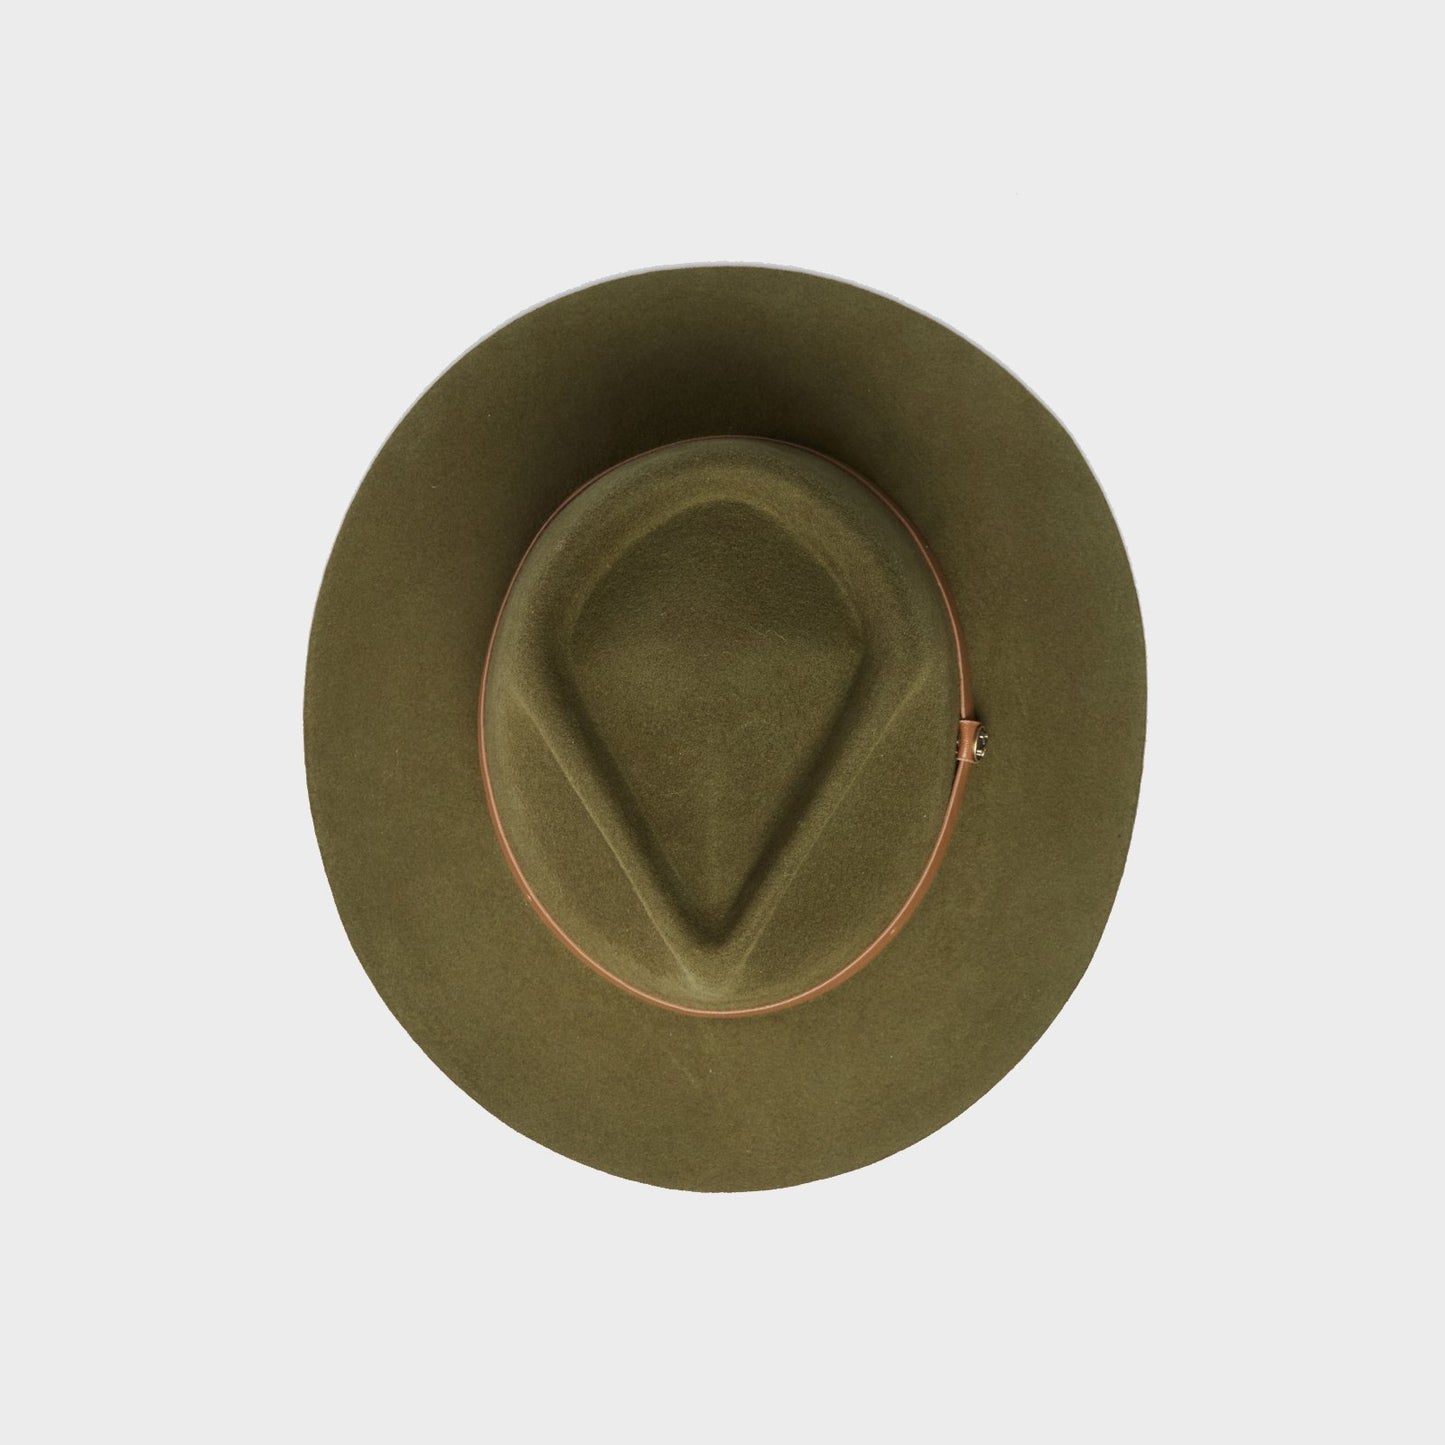 Greened Out - Wide Brim Fedora